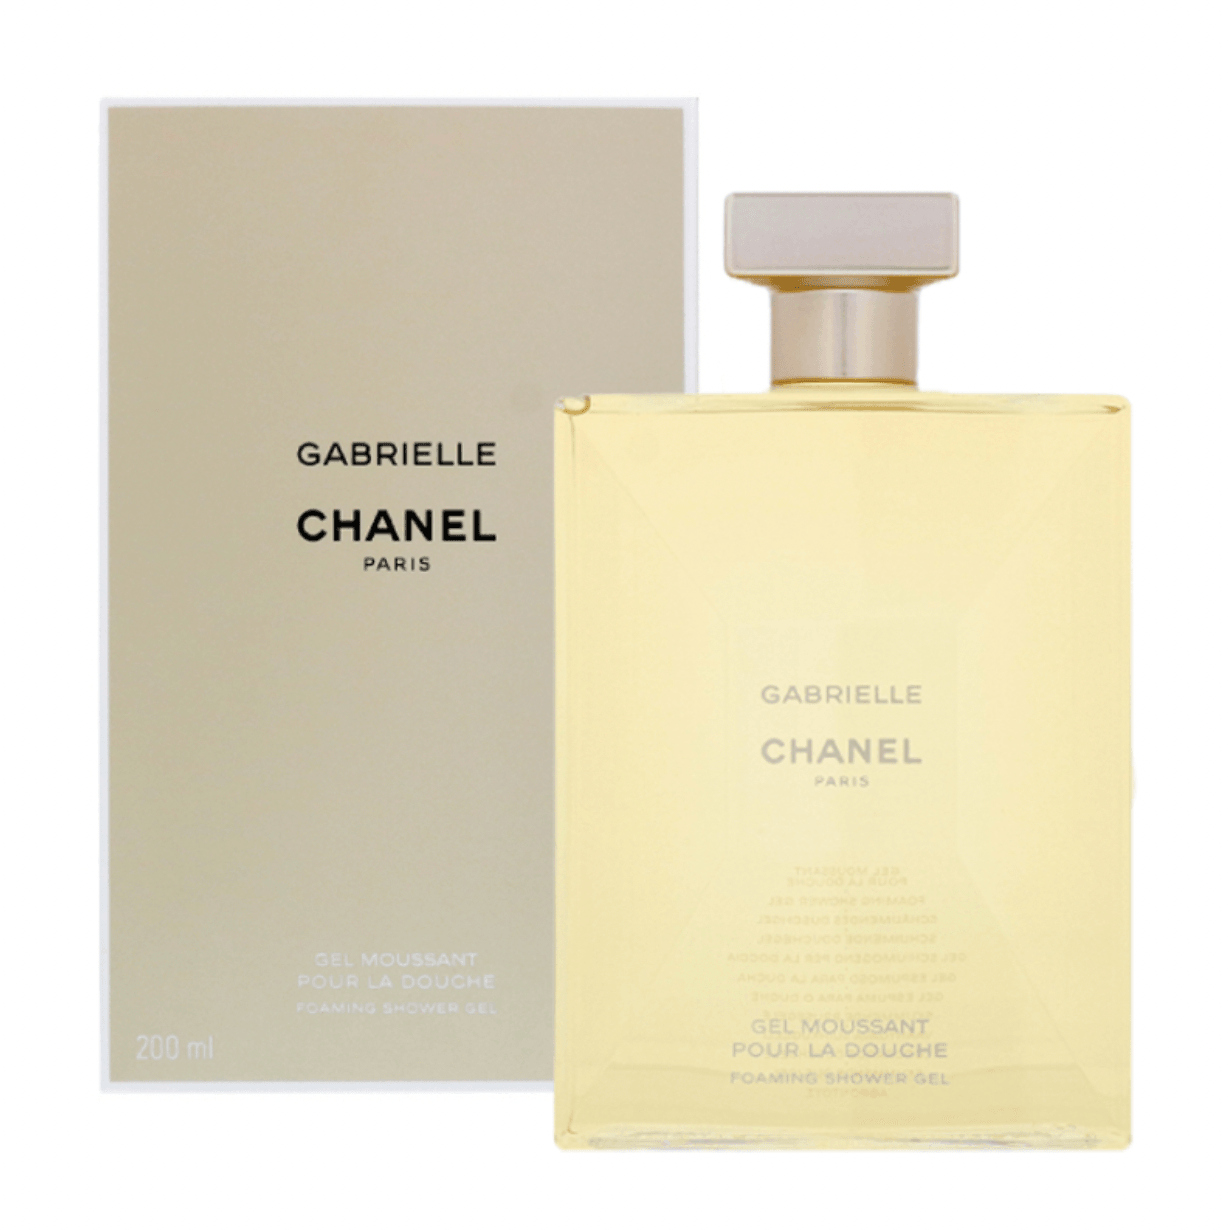 Comparative Review of Gabrielle Chanel Parfum, the Original and